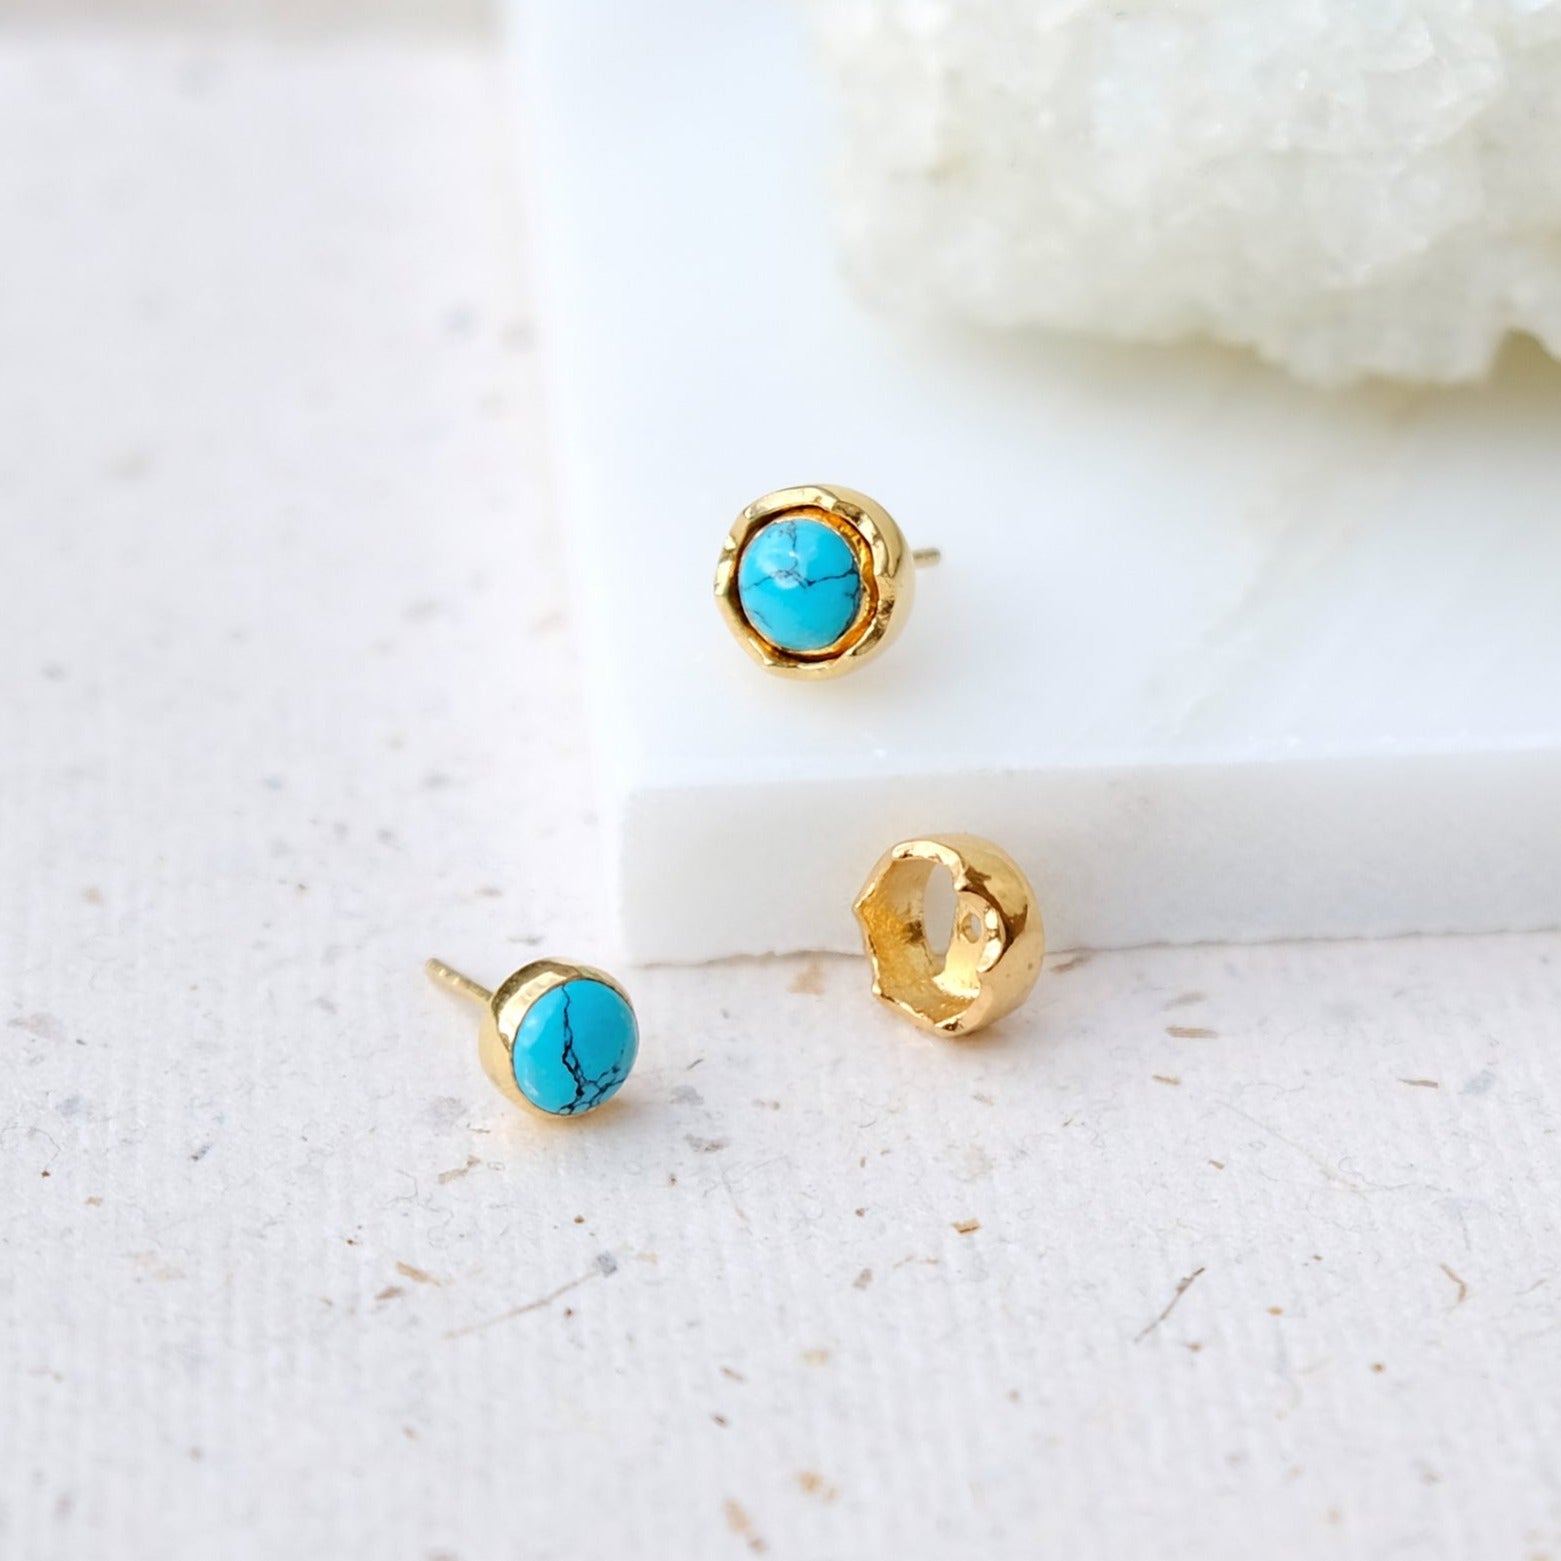 GOLD AND TURQUOISE STUD EARRINGS